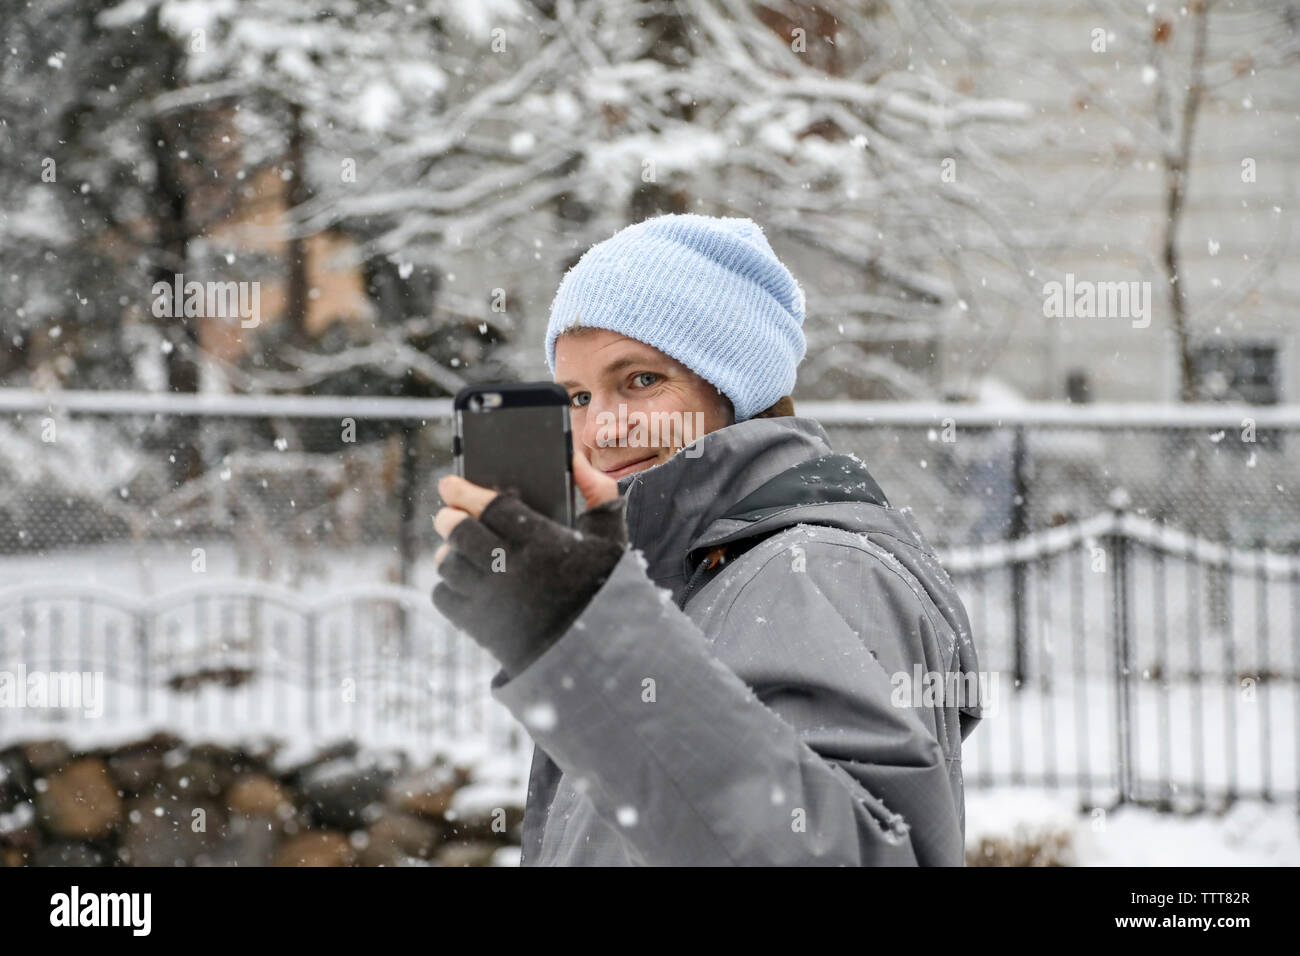 Smiling man wearing warm clothing while taking selfie with smart phone during snowfall Stock Photo